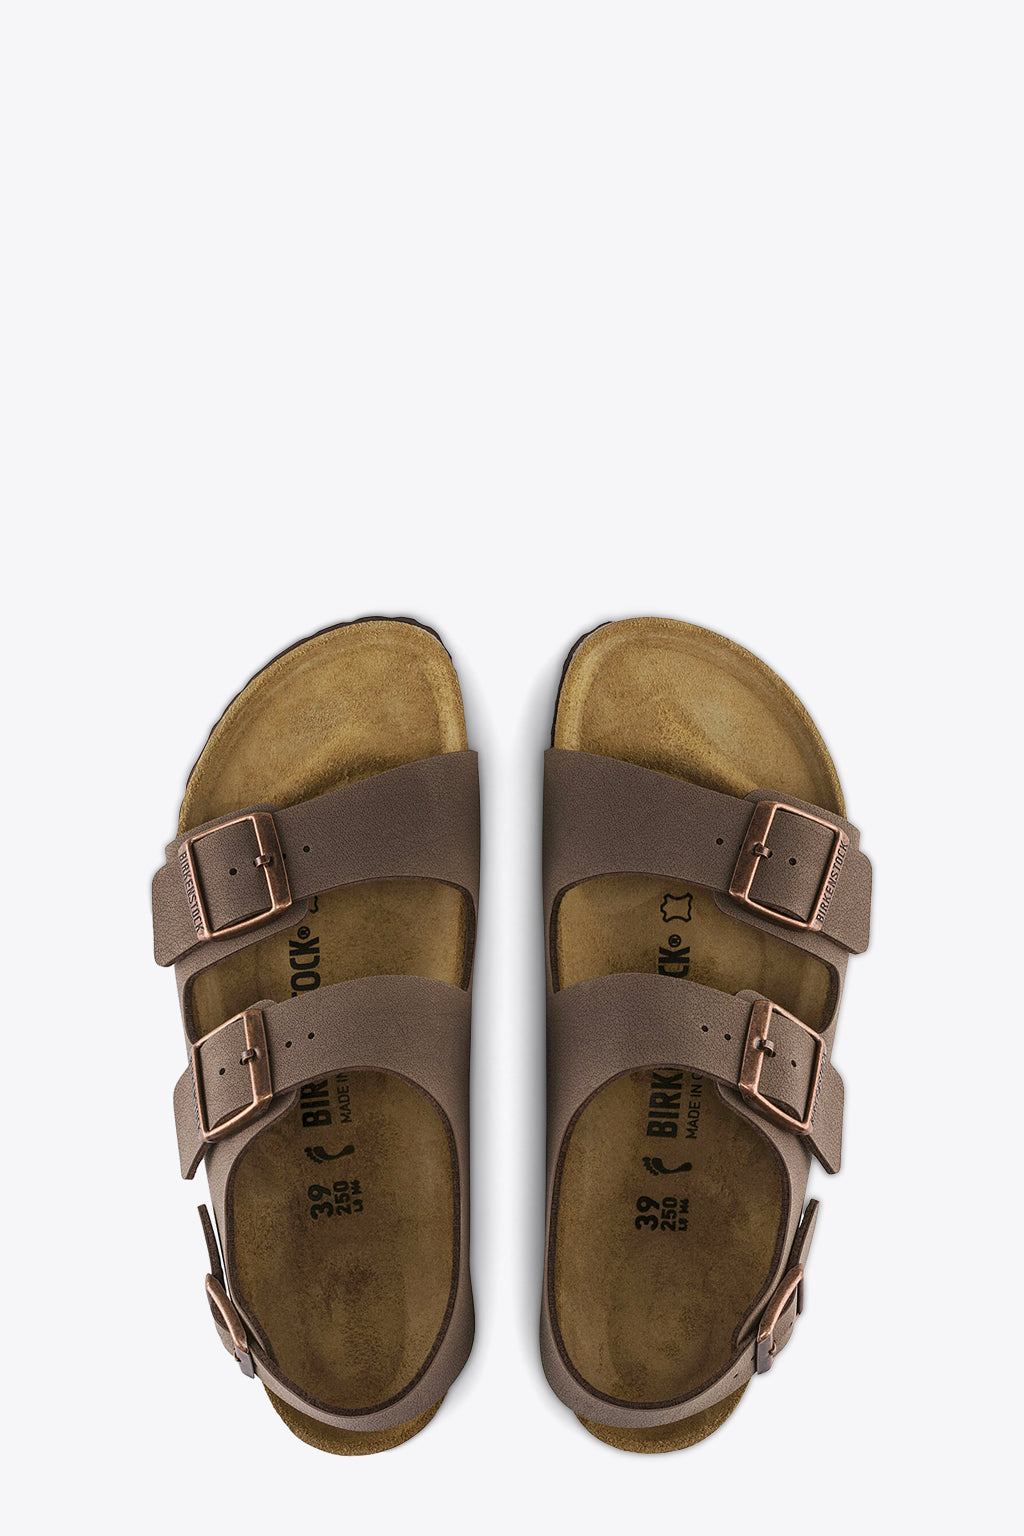 alt-image__Dark-brown-leather-sandal-with-two-upper-straps---ARIZONA